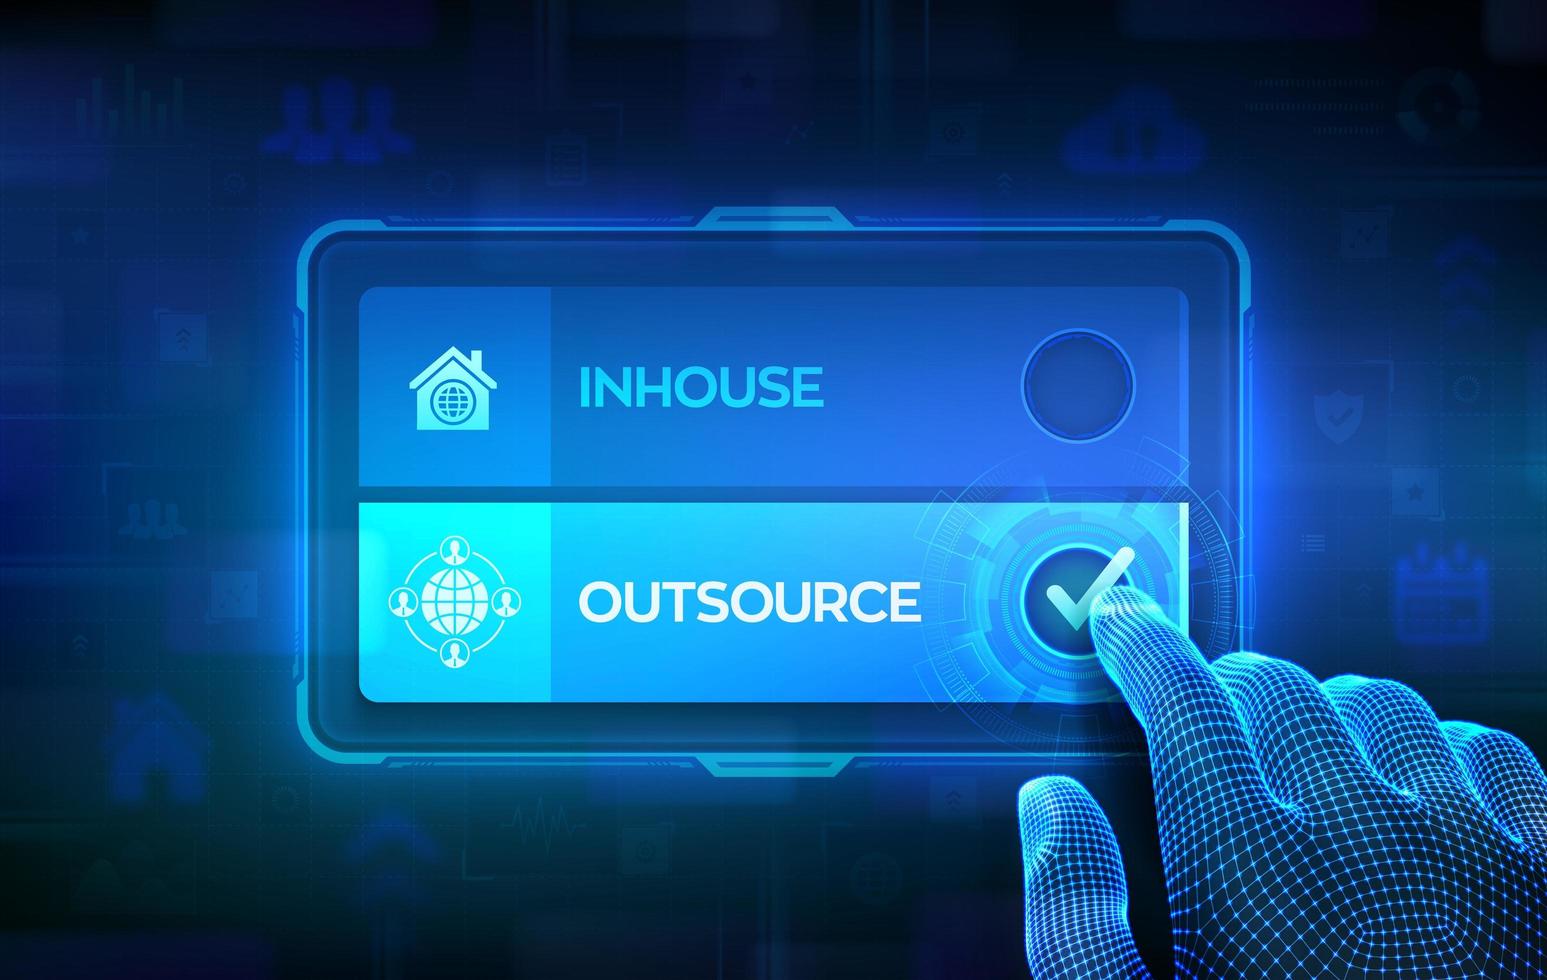 Outsource or inhouse choice concept. Making decision. vector